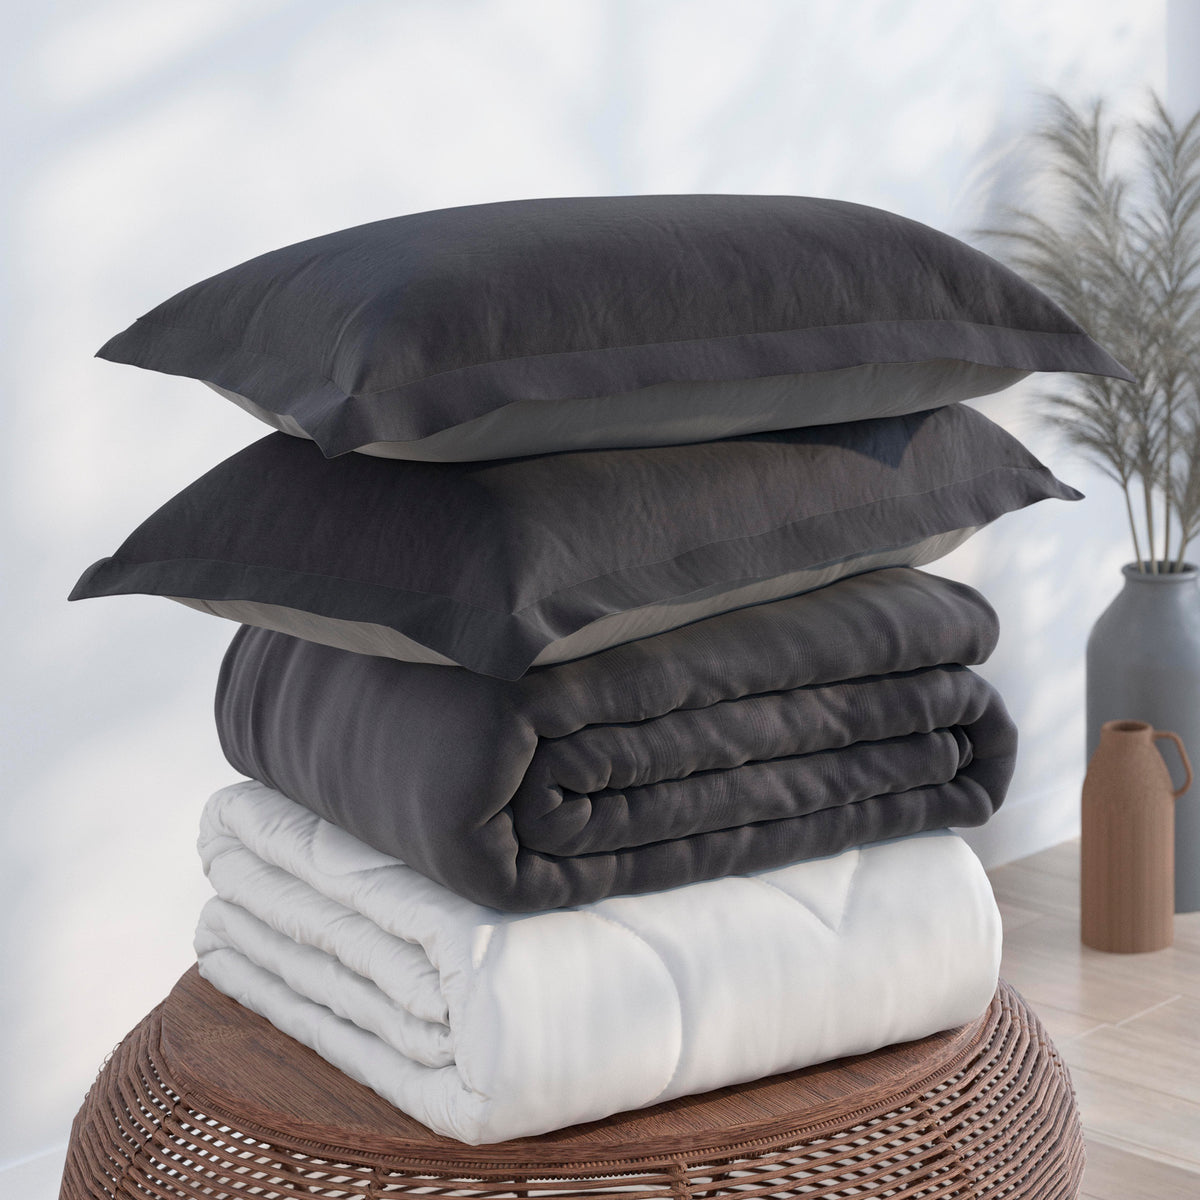 Image of the Dove Gray/Shadow Soft Touch Bundle on top of a brown table. The bedding shown includes (from top to bottom): 2 Dove Gray/Shadow Pillow Shams with the Shadow side facing up, a neatly folded Dove Gray/Shadow Soft Touch Duvet Cover with the Shadow side showing, and a neatly folded Soft Touch Duvet Insert 